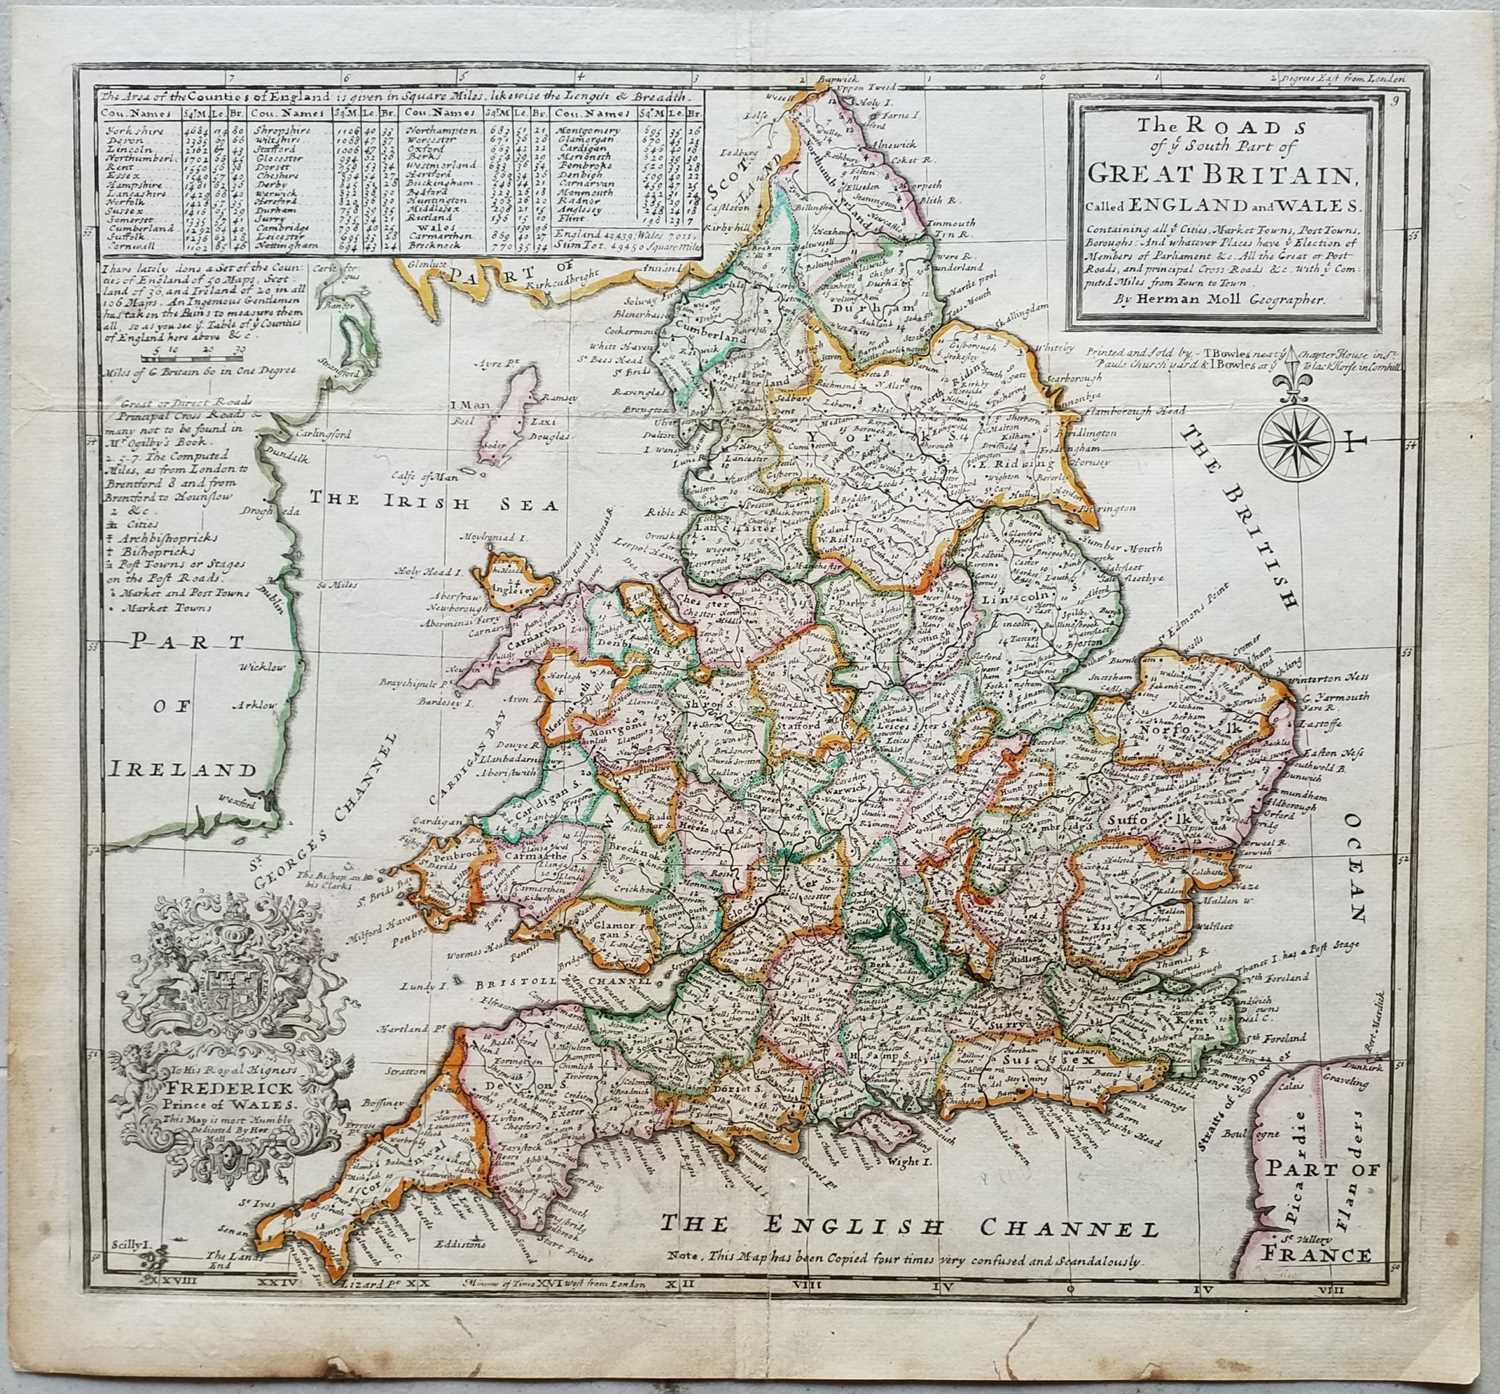 Lot 24 - England & Wales, A collection of 20 engraved maps, 18th and 19th-century.